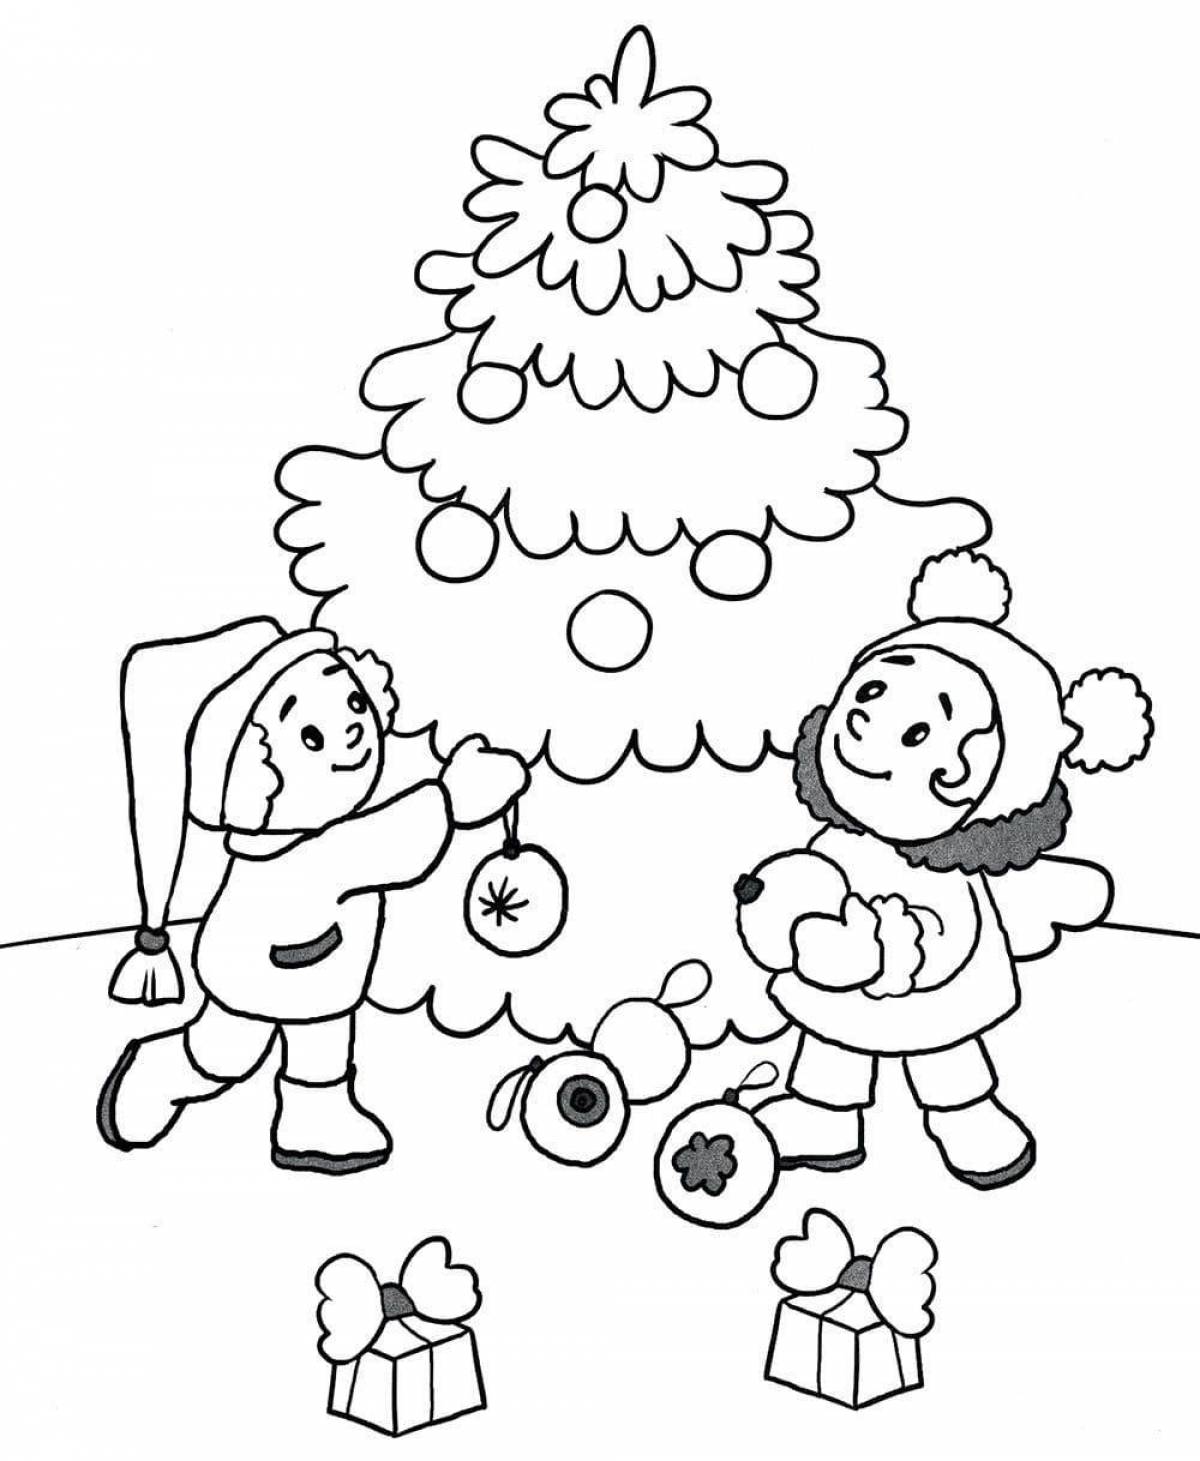 Adorable Christmas tree coloring book for 3-4 year olds